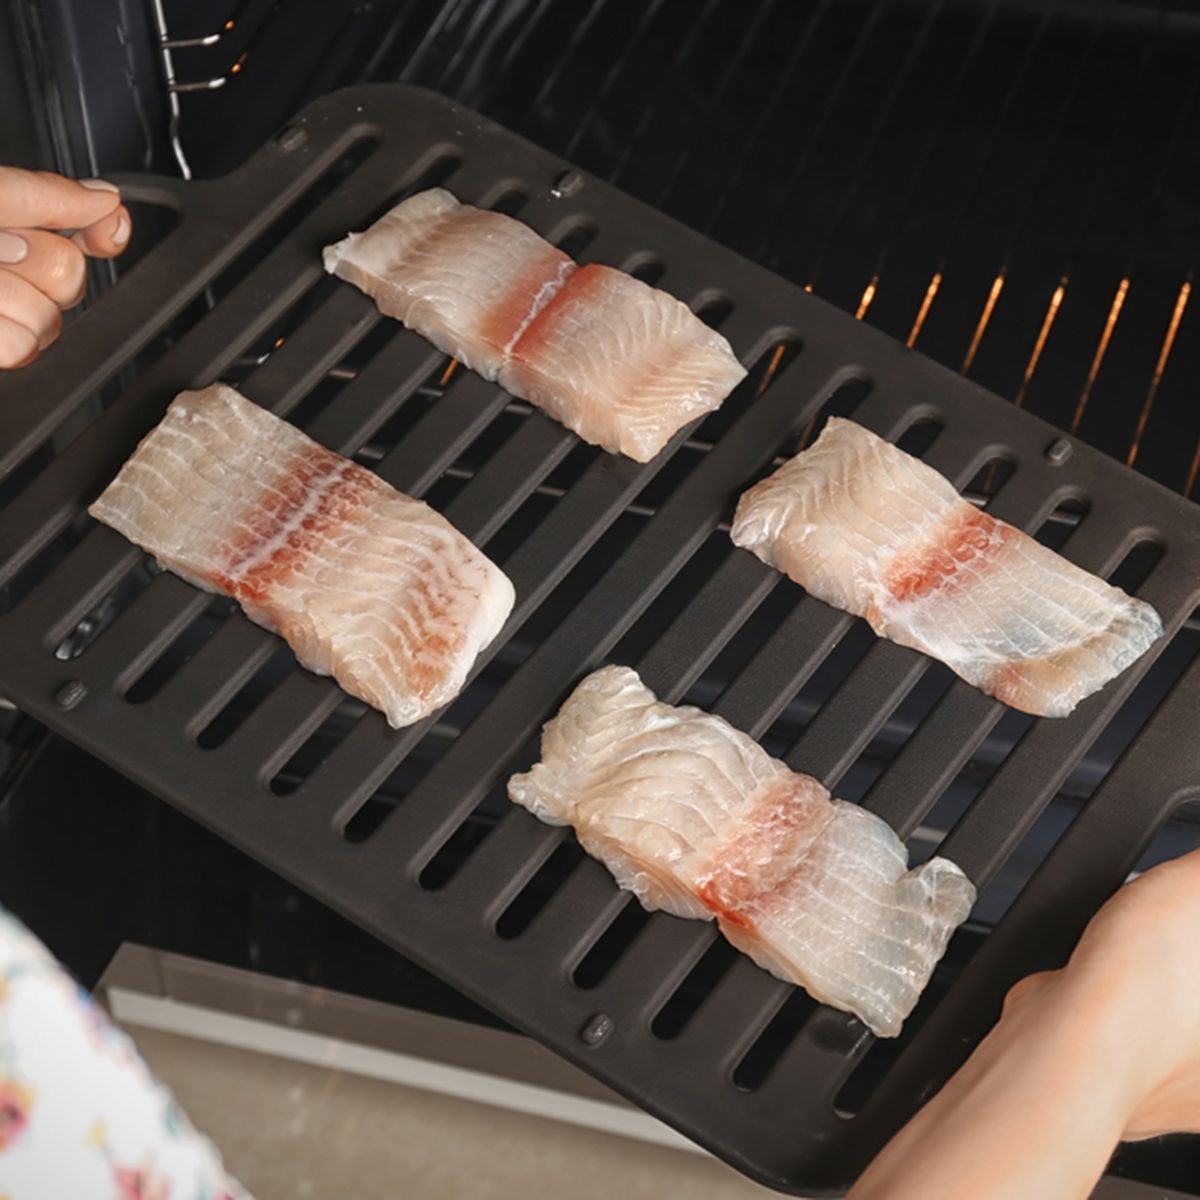 Woman putting broiler pan with fish fillet slices into oven; Shutterstock ID 715921033; Job (TFH, TOH, RD, BNB, CWM, CM): TOH